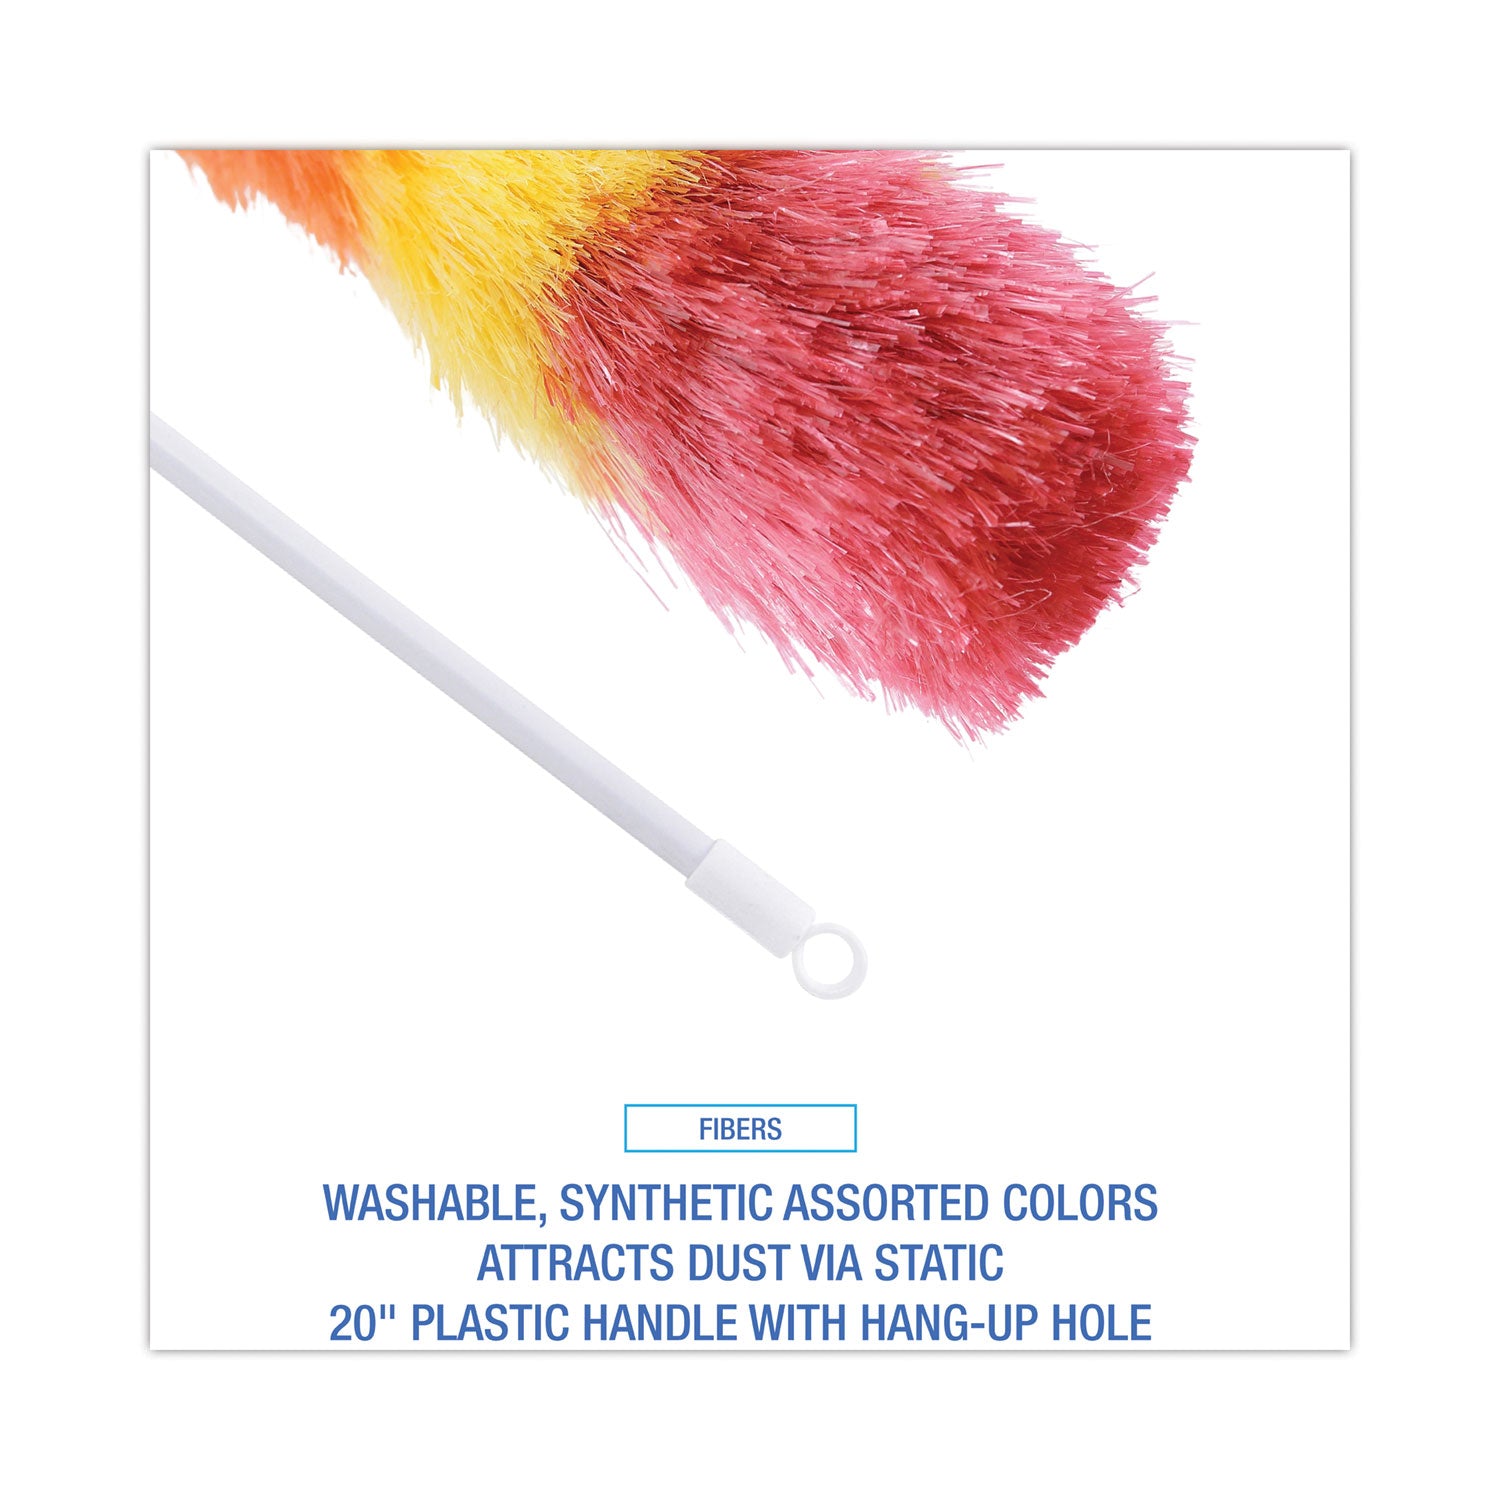 polywool-duster-w-20-plastic-handle-assorted-colors_bwk9441 - 3